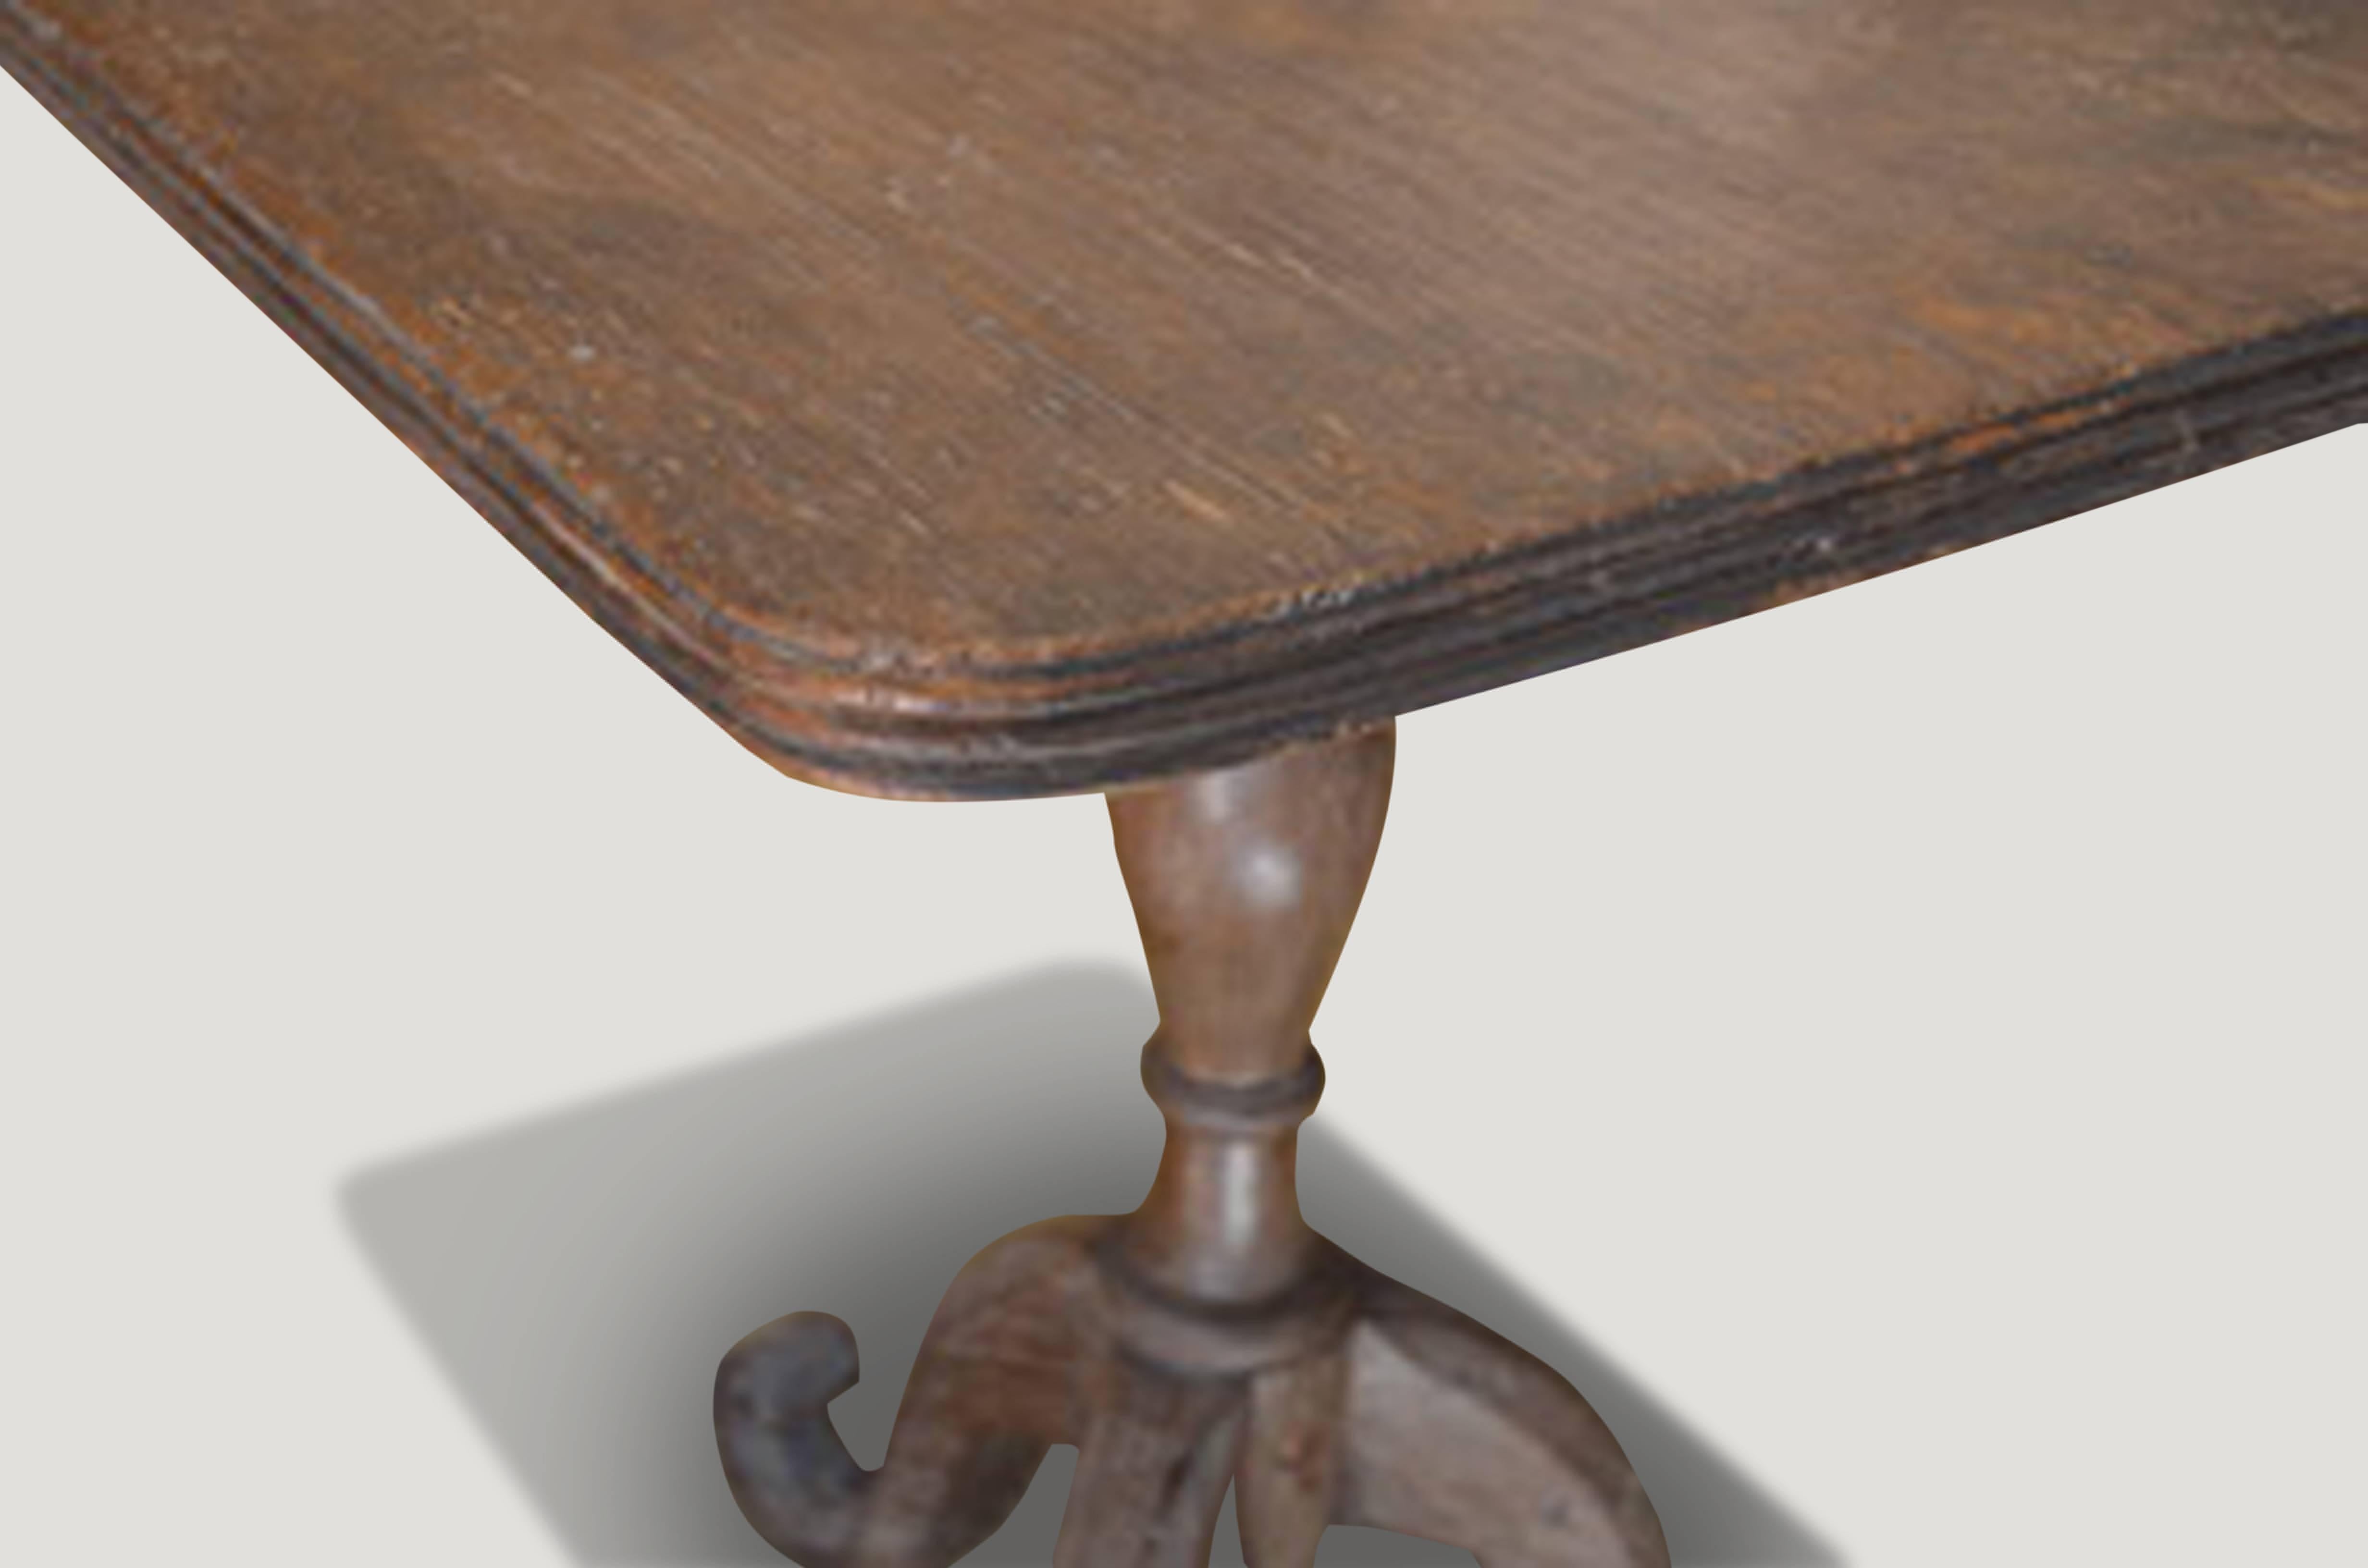 Andrianna Shamaris Hand-Carved Antique Teak Wood Side Table In Excellent Condition For Sale In New York, NY